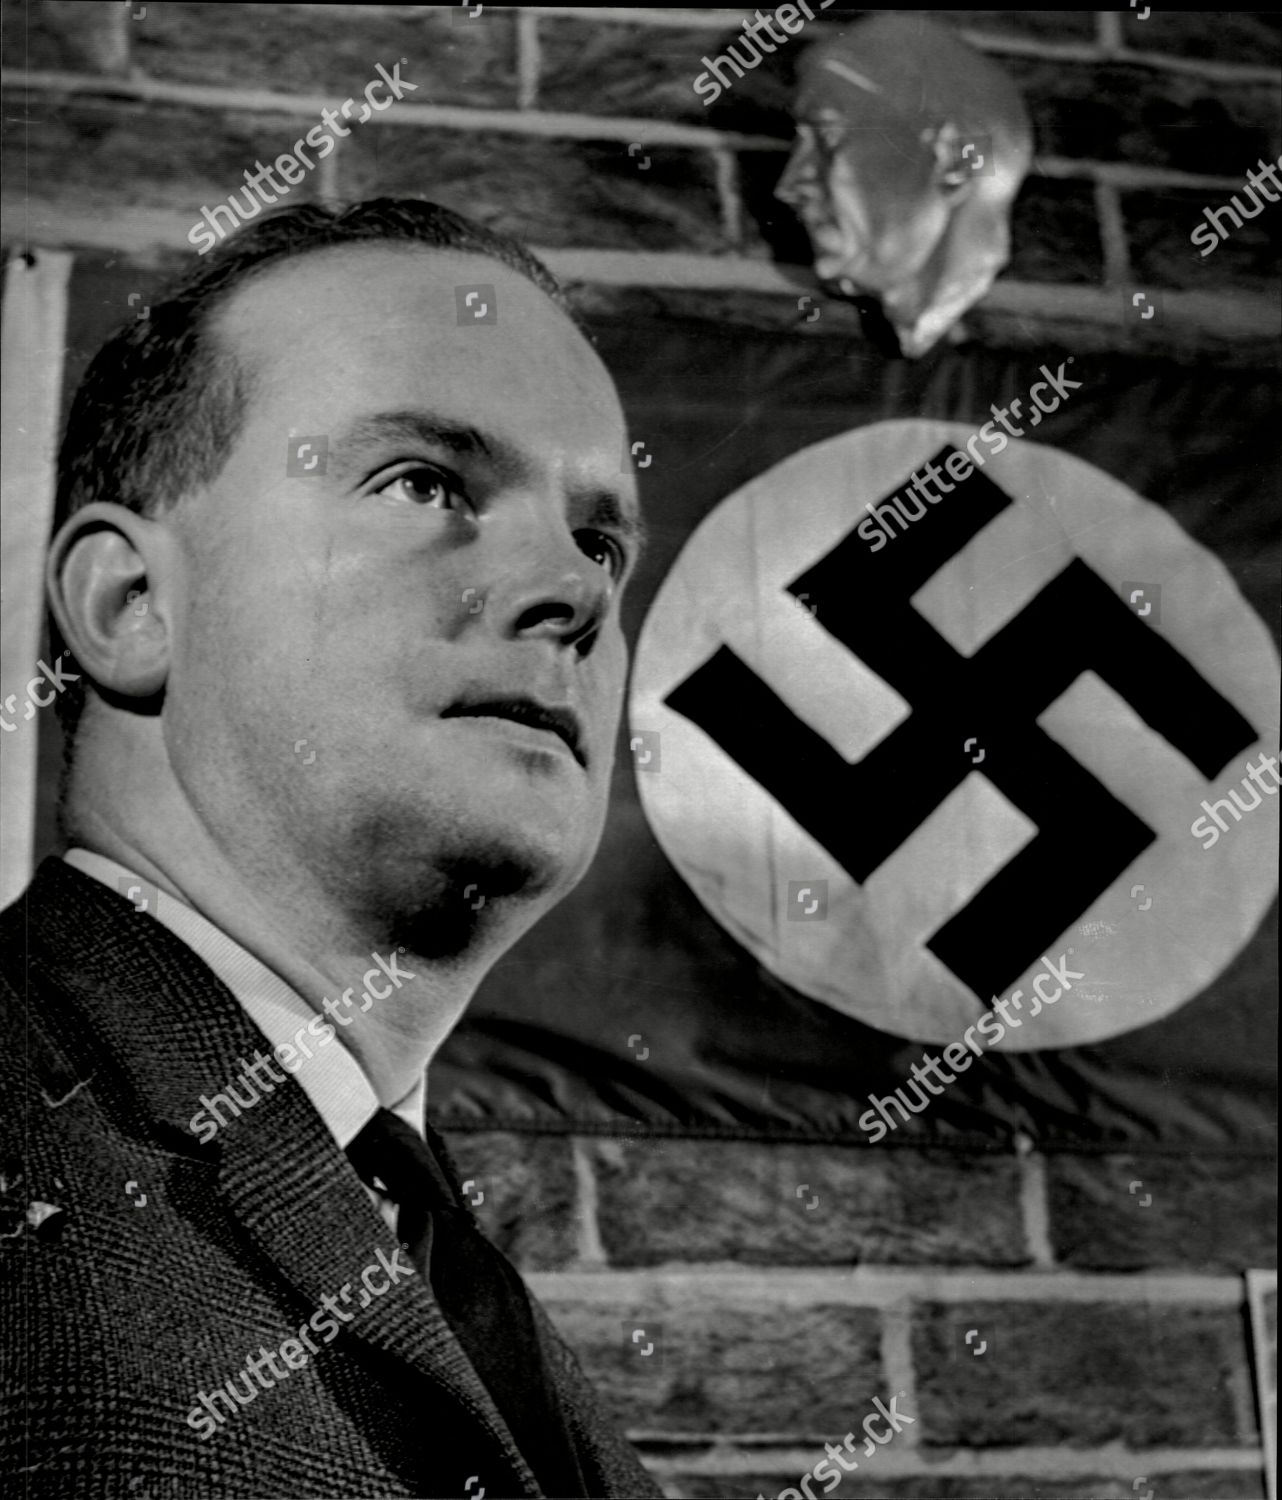 Venlighed silhuet Exert Colin Jordan Leader National Socialist Party Swastika Editorial Stock Photo  - Stock Image | Shutterstock